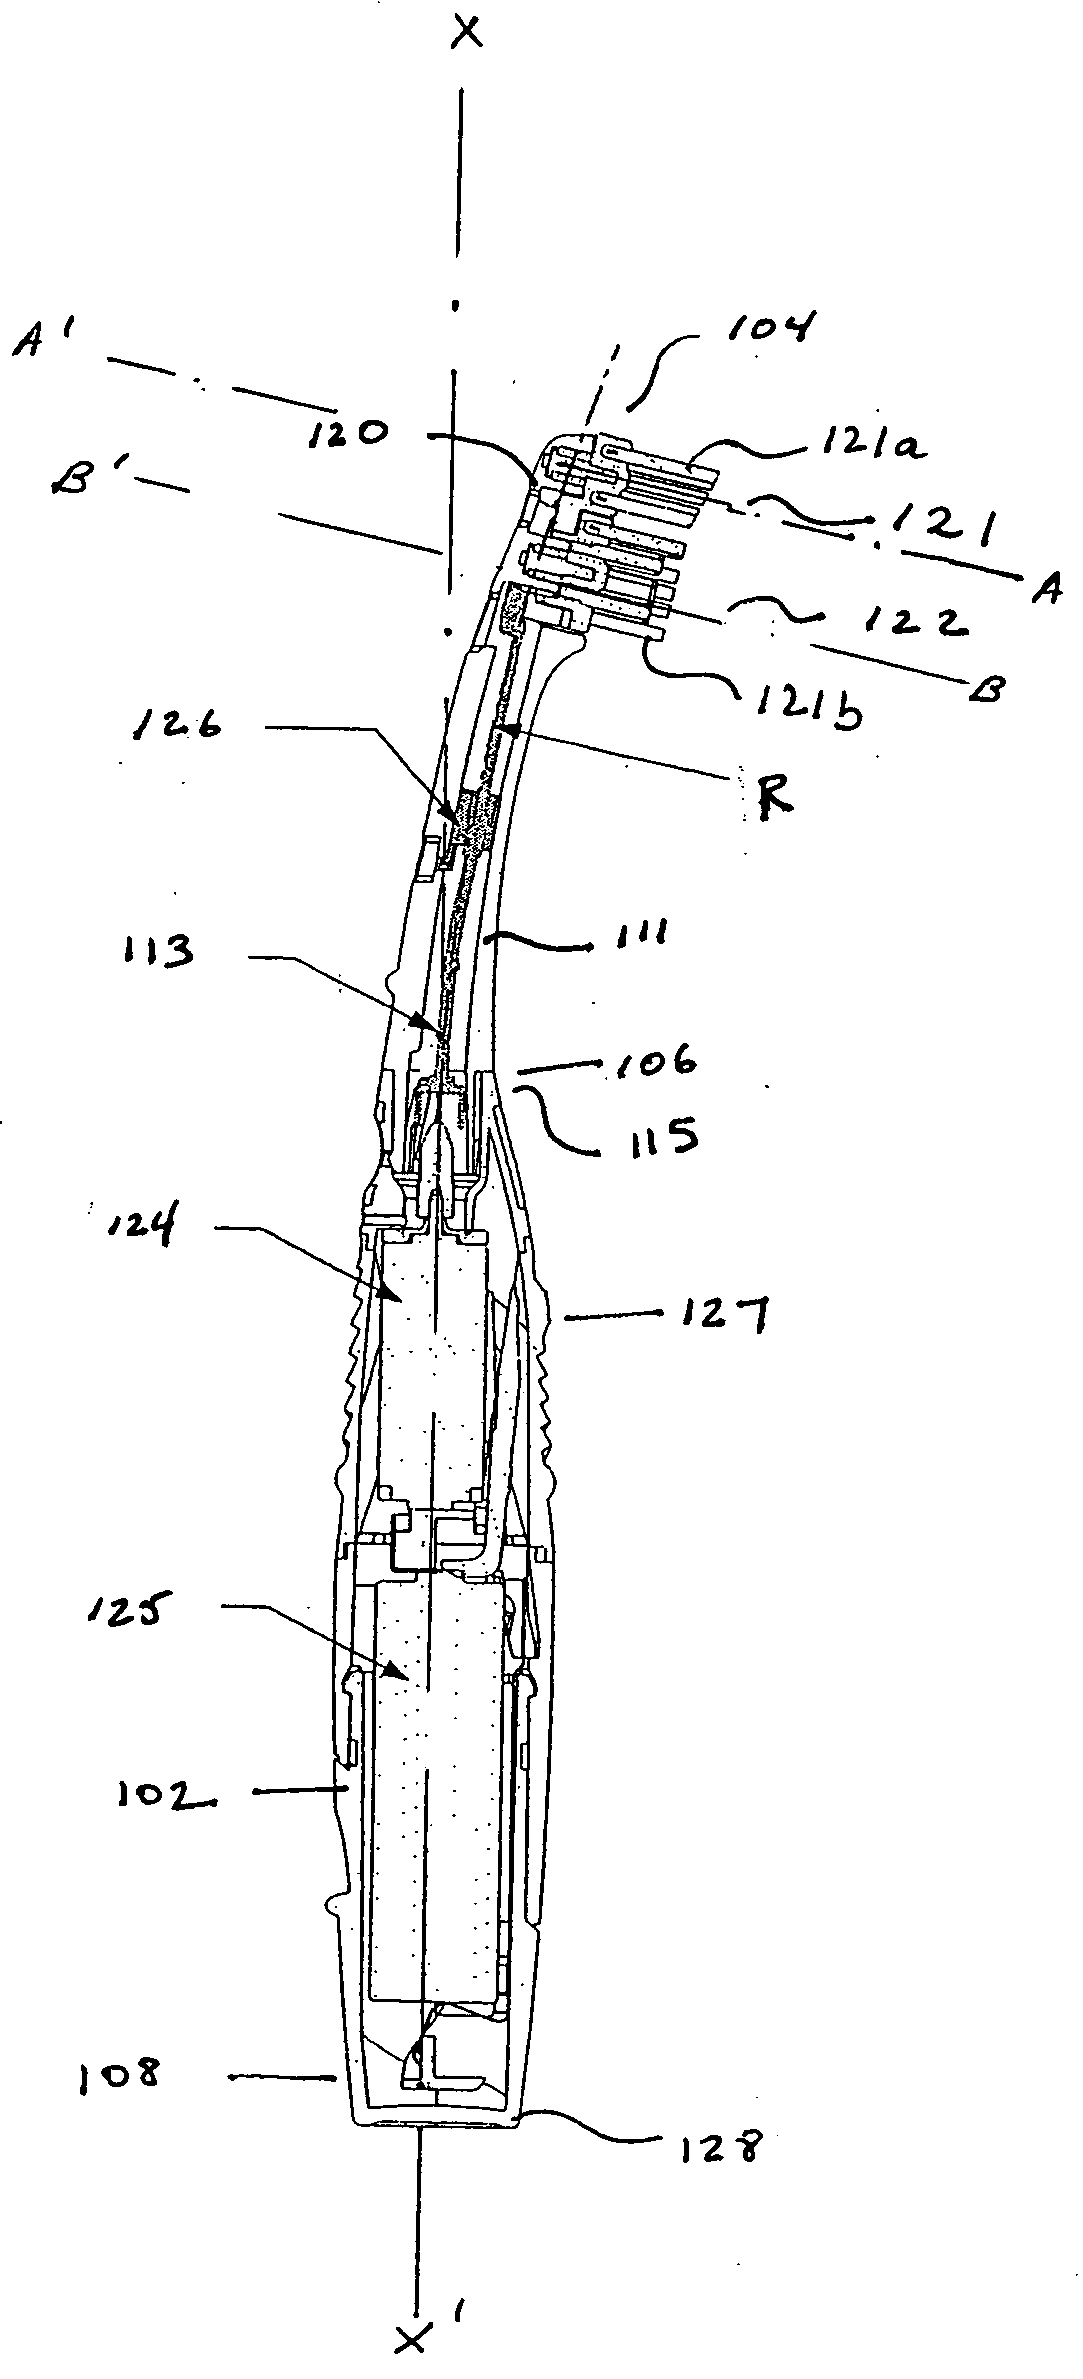 Powered toothbrush with curved neck and flexible shaft and single battery